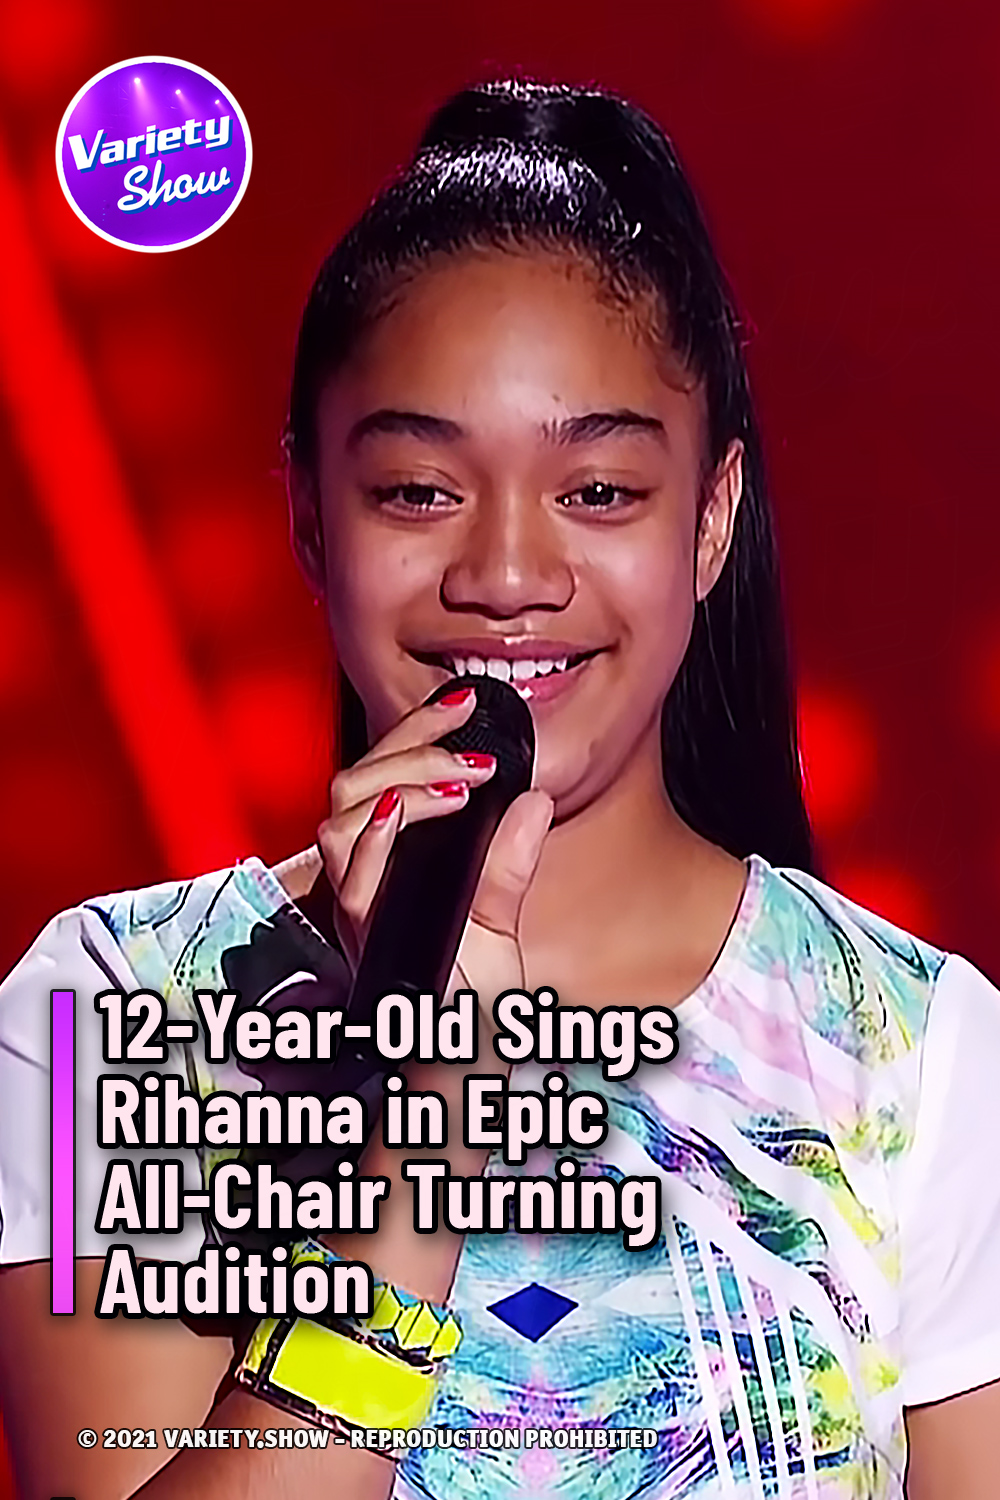 12-Year-Old Sings Rihanna in Epic All-Chair Turning Audition